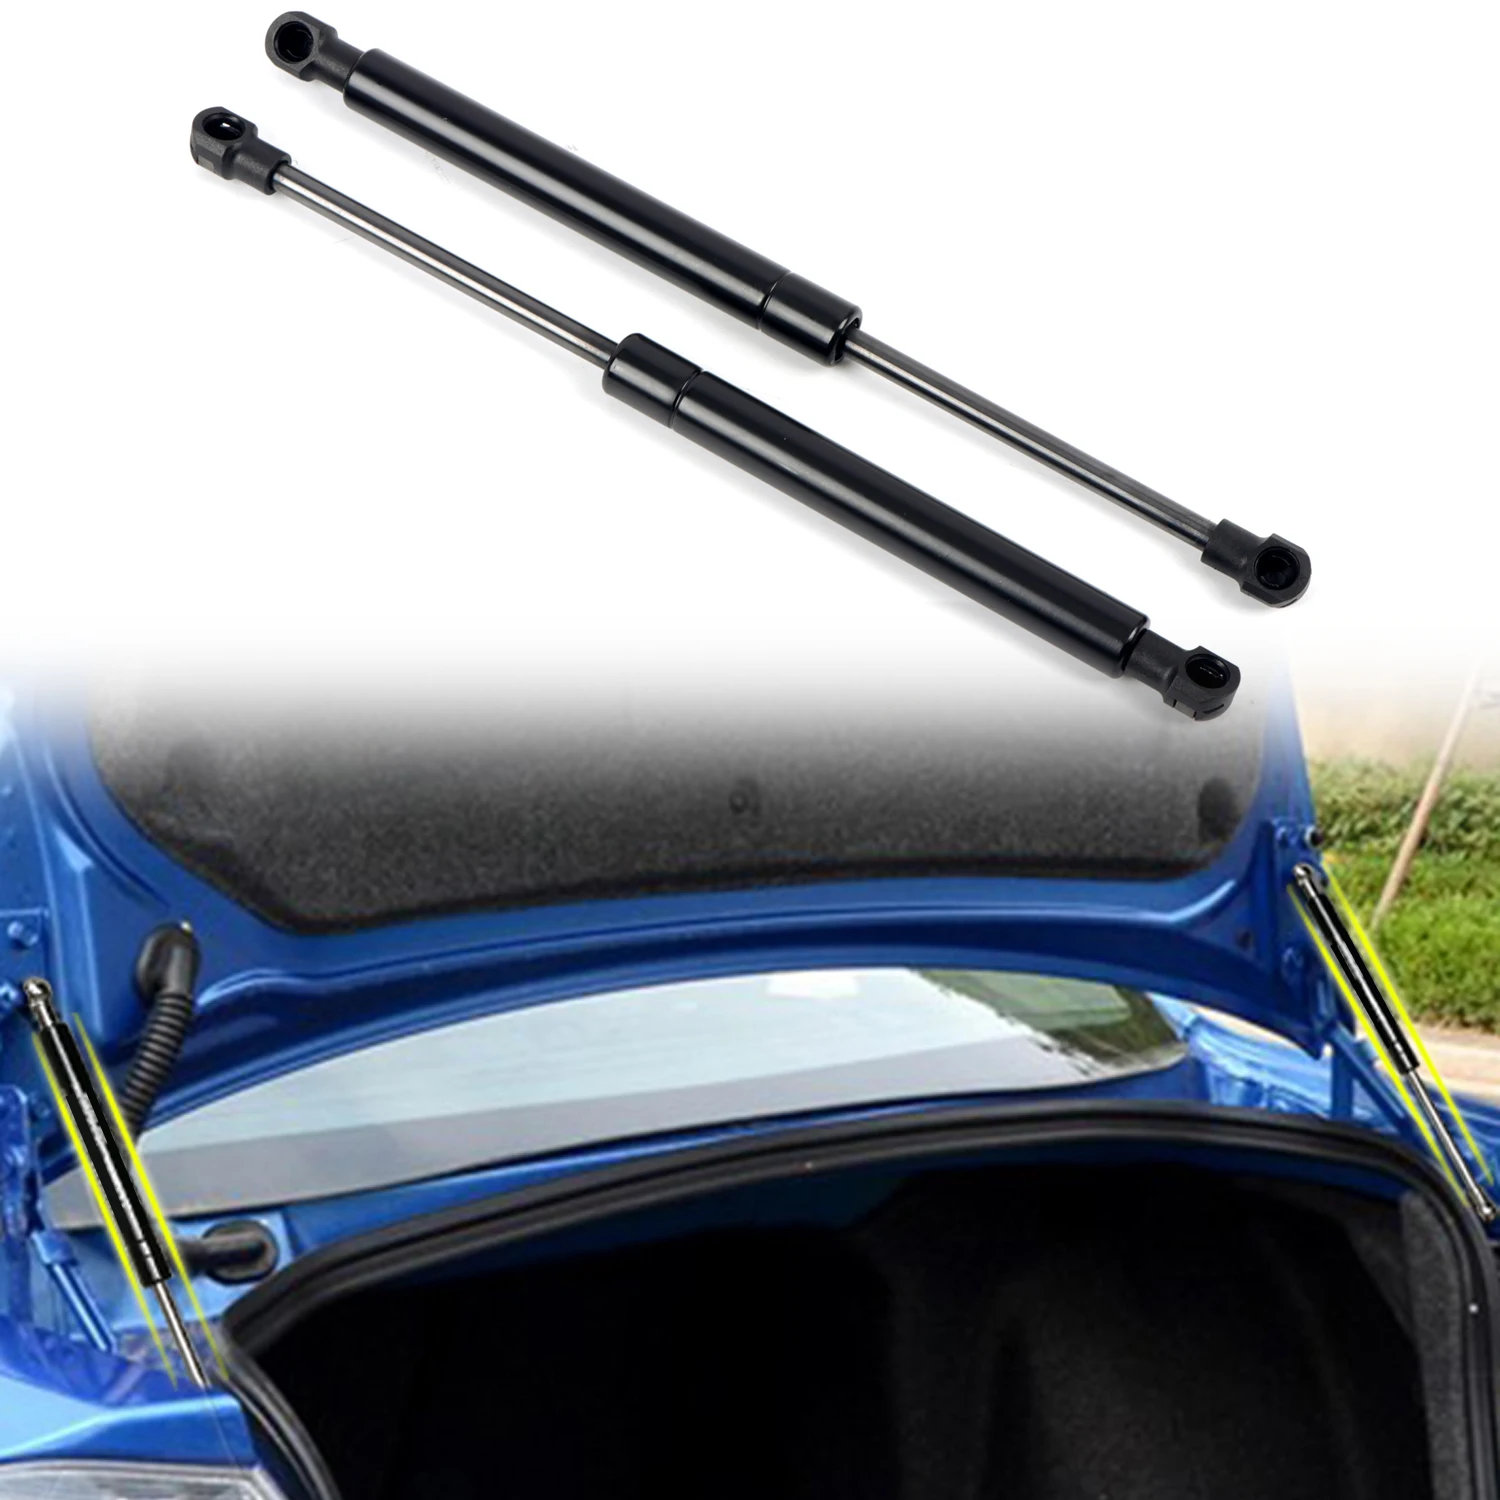 

for Mitsubishi Lancer 2008-2017 Steel Rear Hood Struts Lift Supports Gas Spring Shocks Dampers Replacement 2pcs Car Accessories